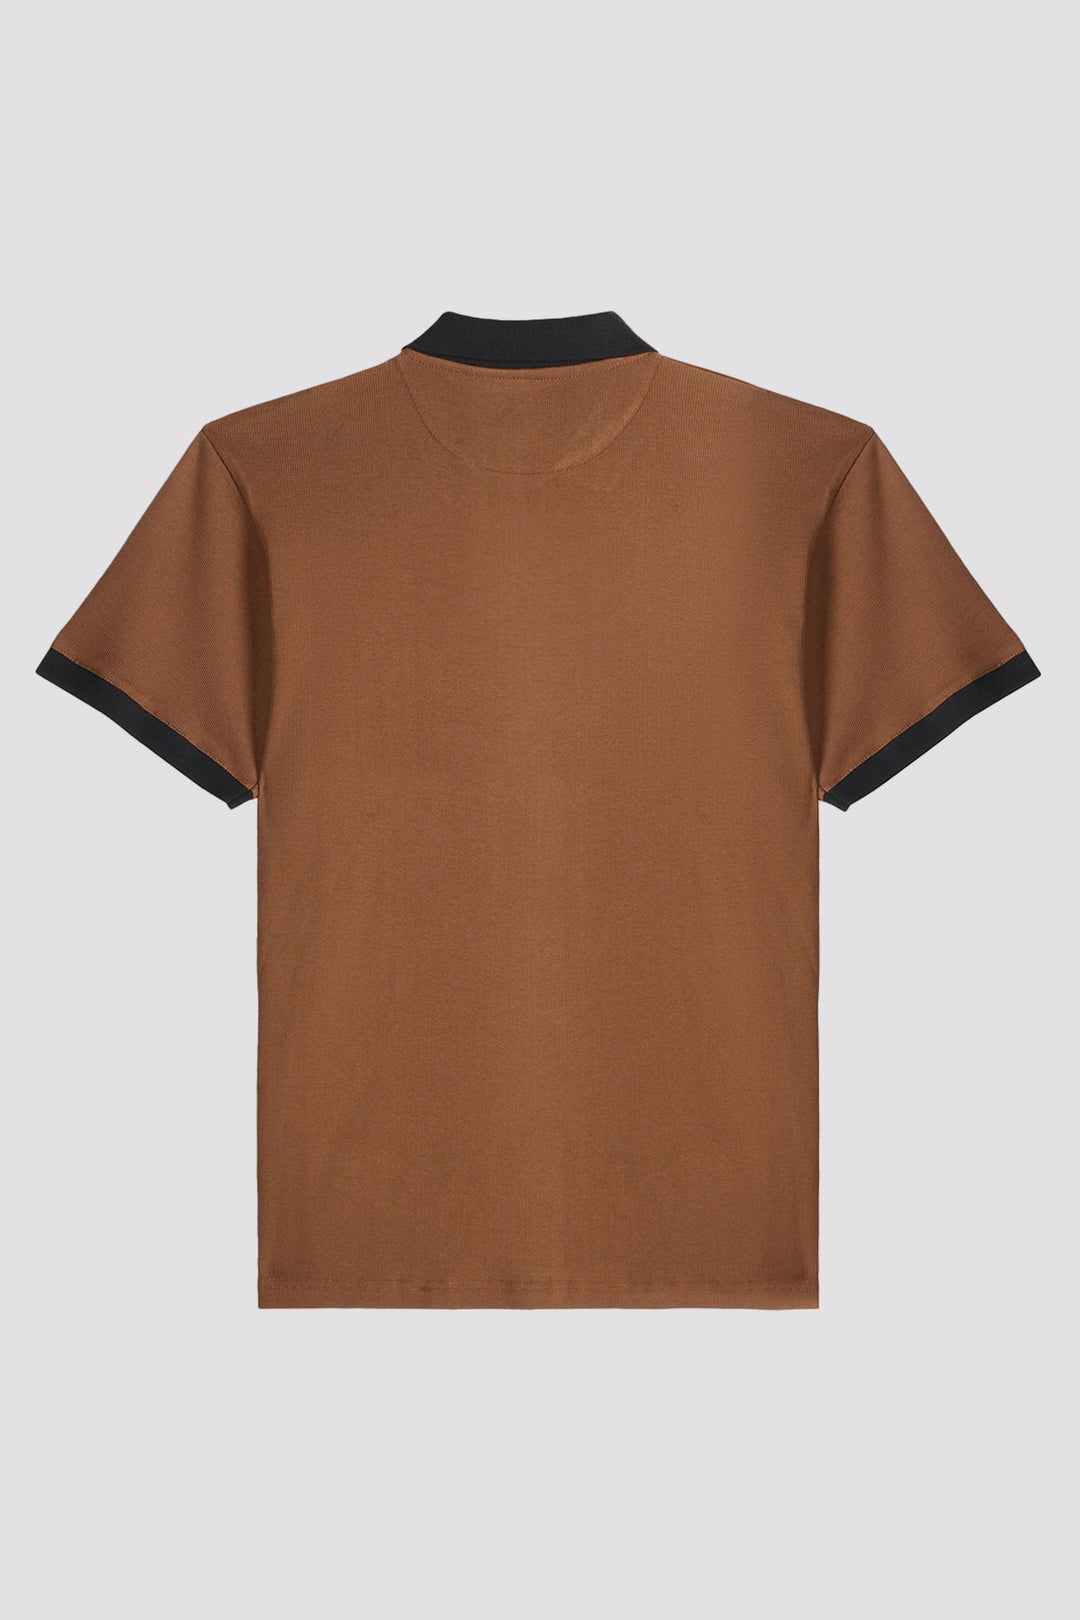 Brown Ribbed Knitted Polo Shirt - A24 - MP0244R